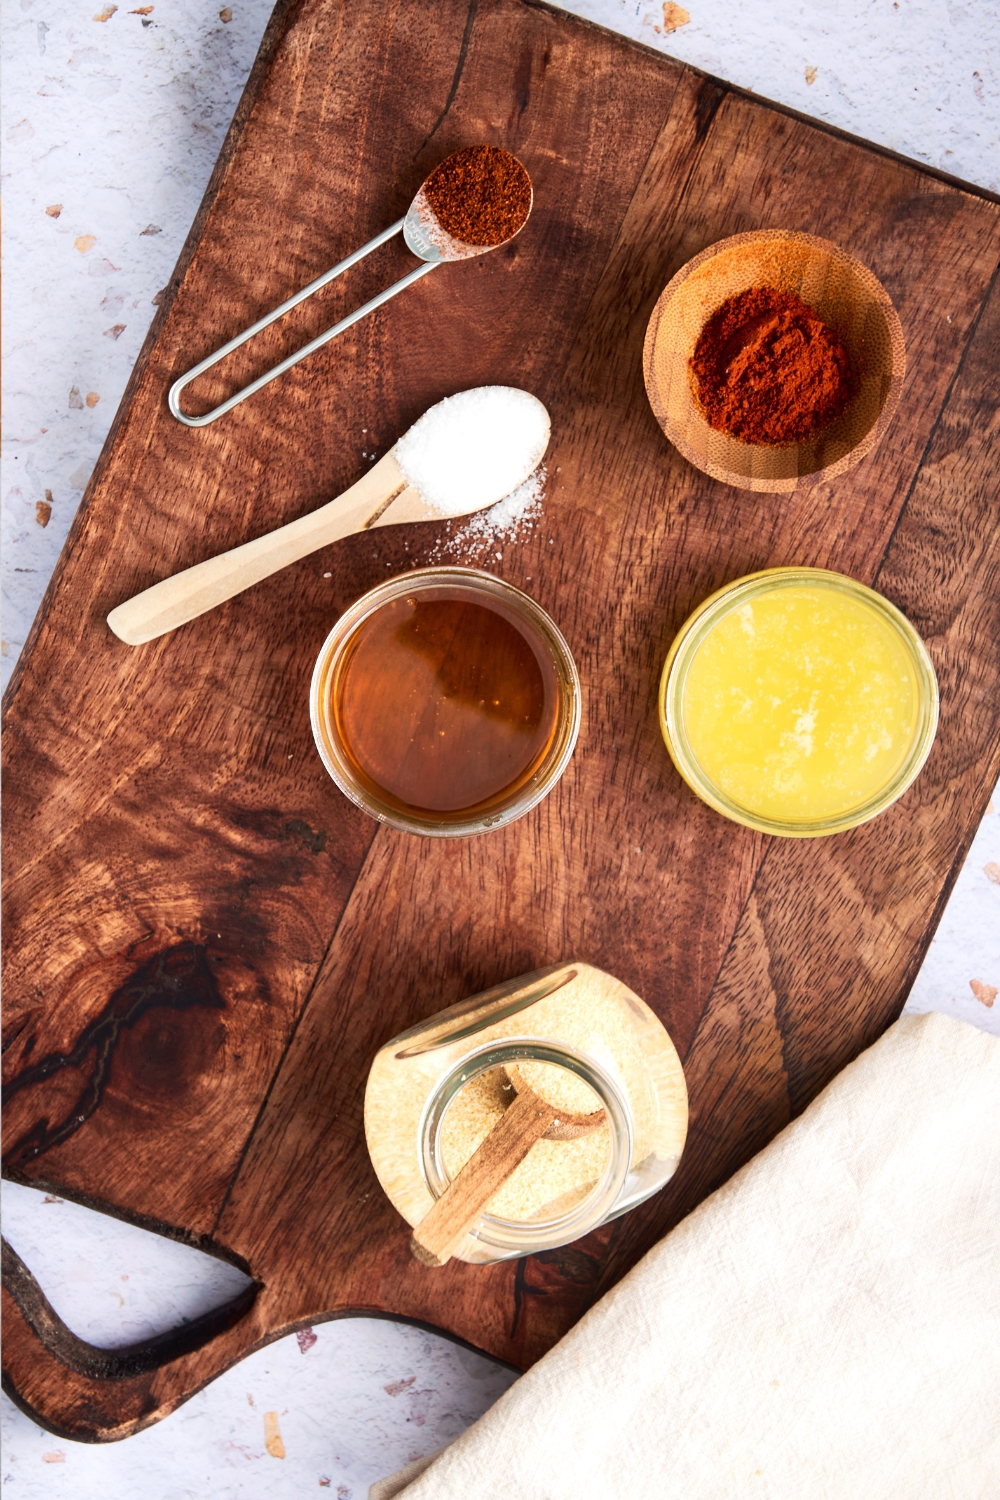 A wooden cutting board holds a glass jar of honey, a jar of melted butter, a wooden bowl of hot paprika, a spoon of chili powder, and a spoon of salt.